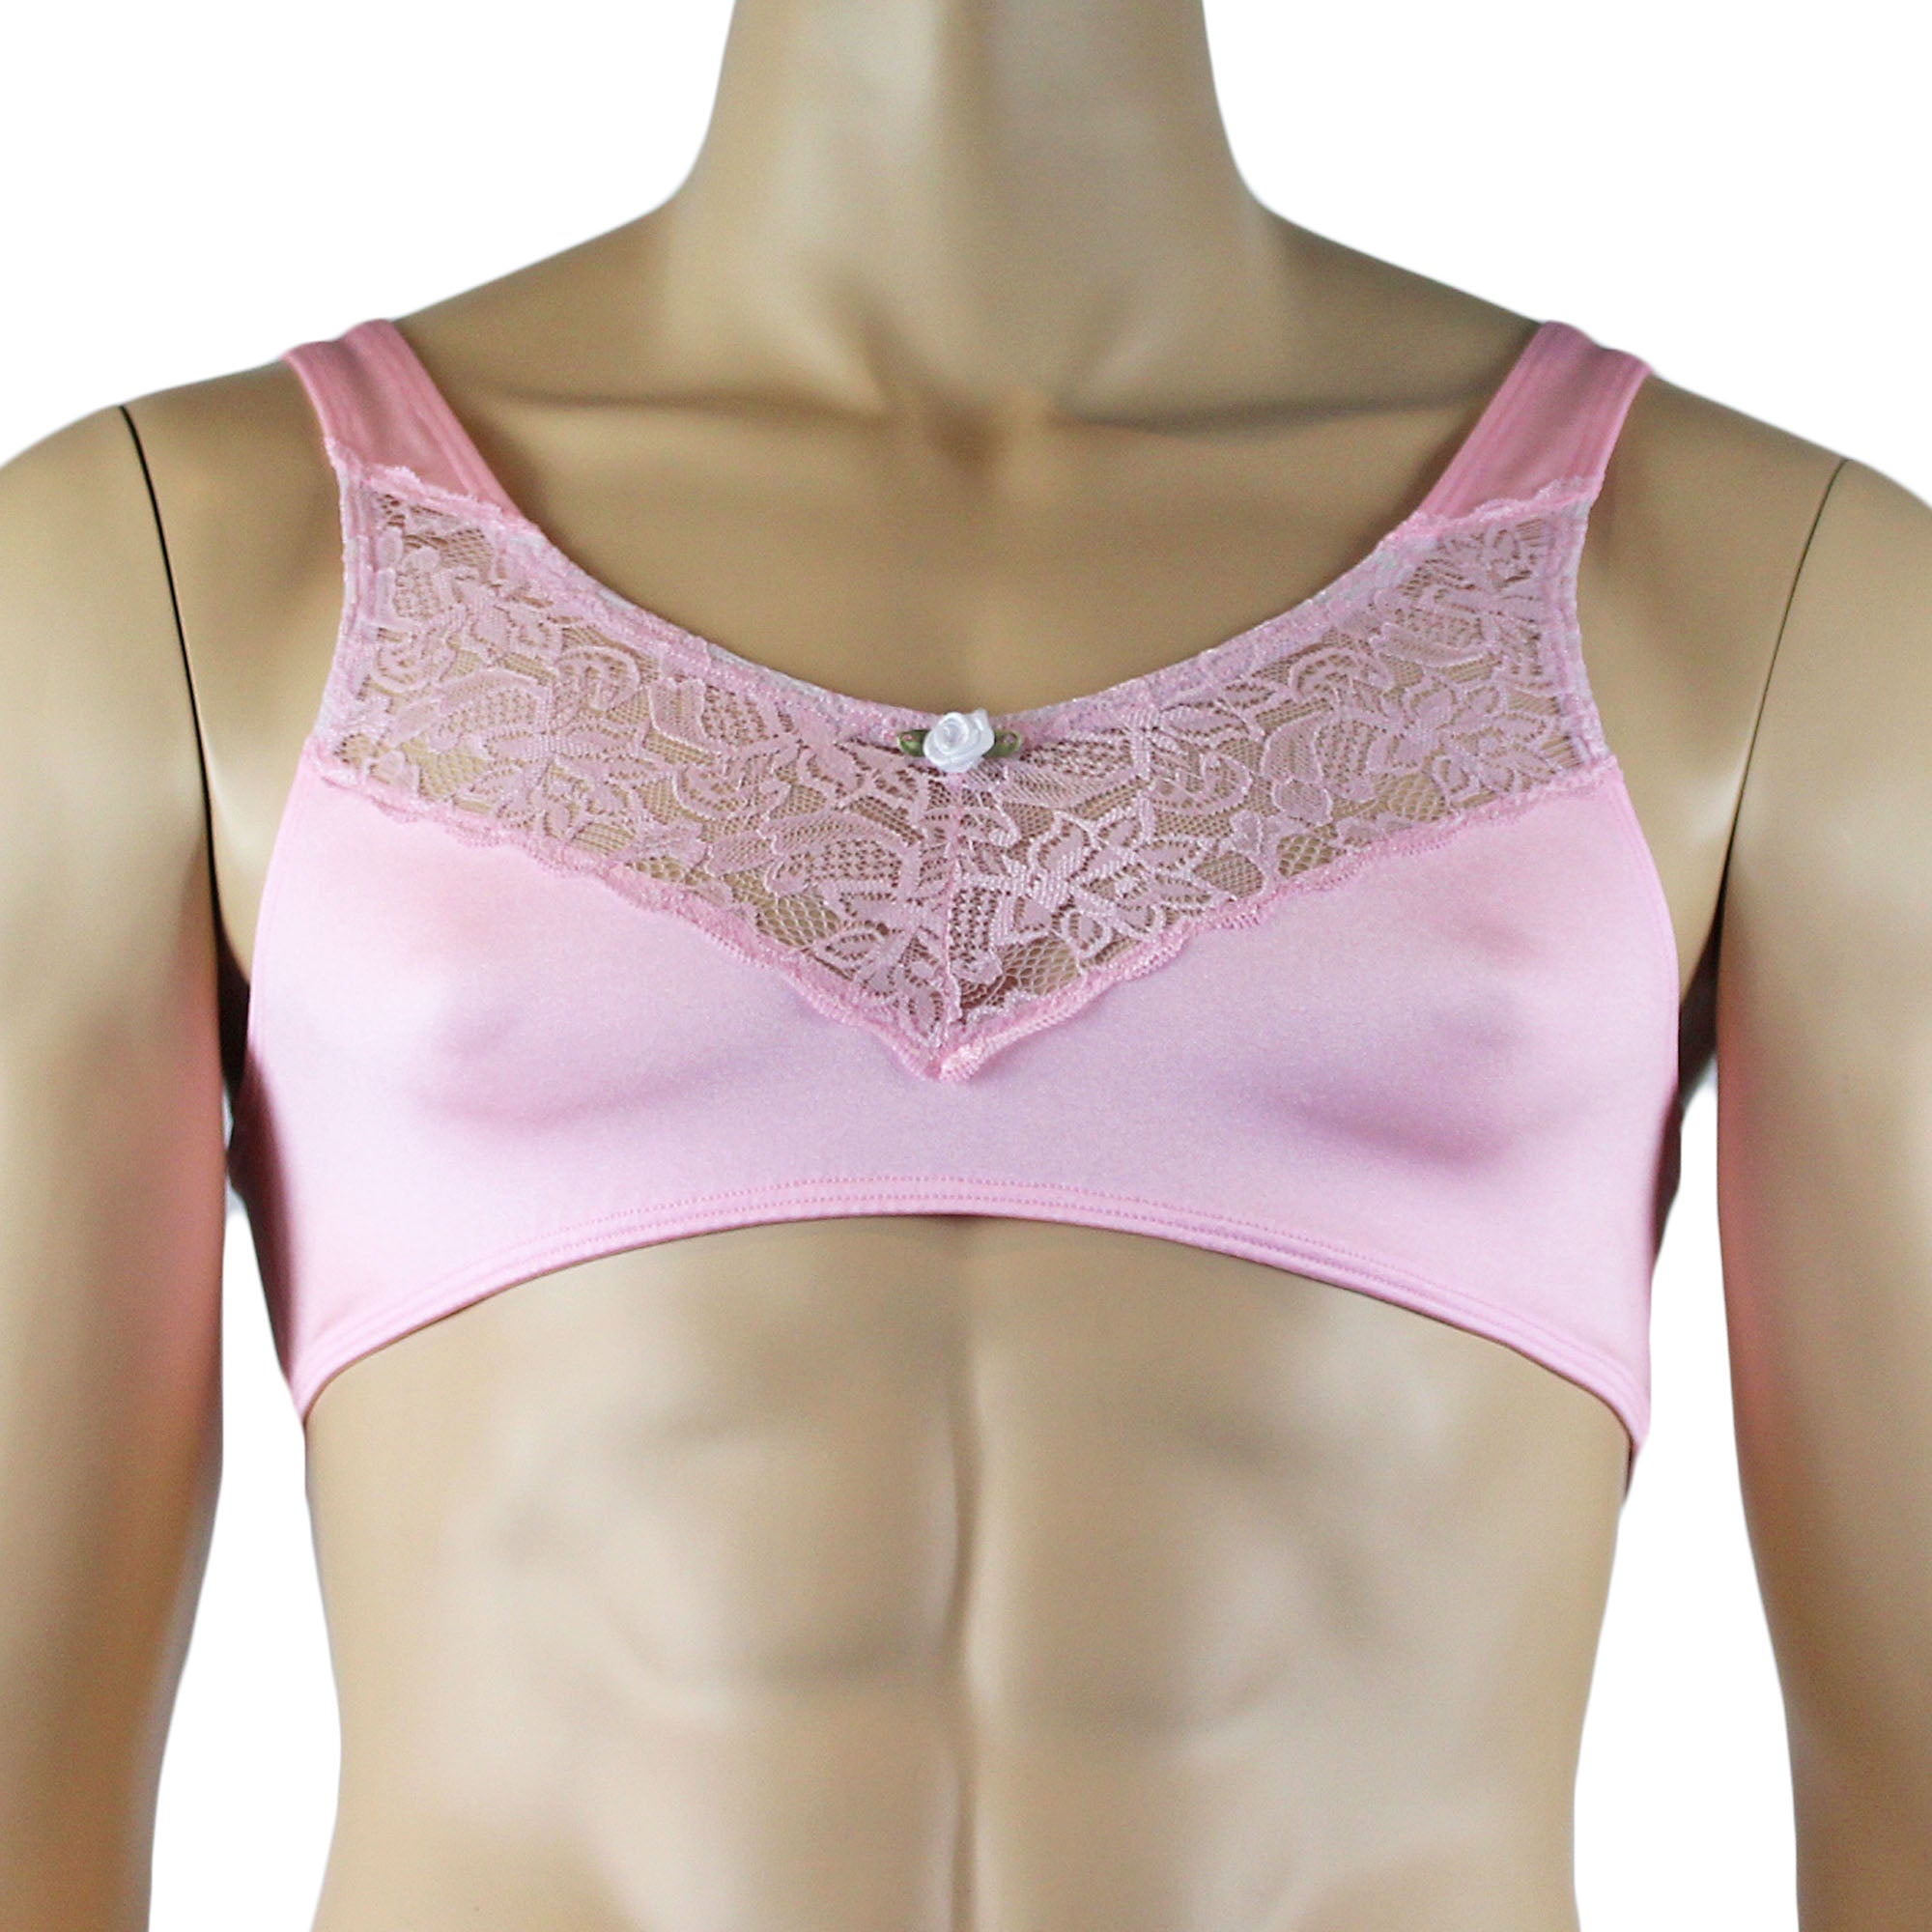 Male Penny Lingerie Bra Top with V Lace front and Capri Bikini Light Pink